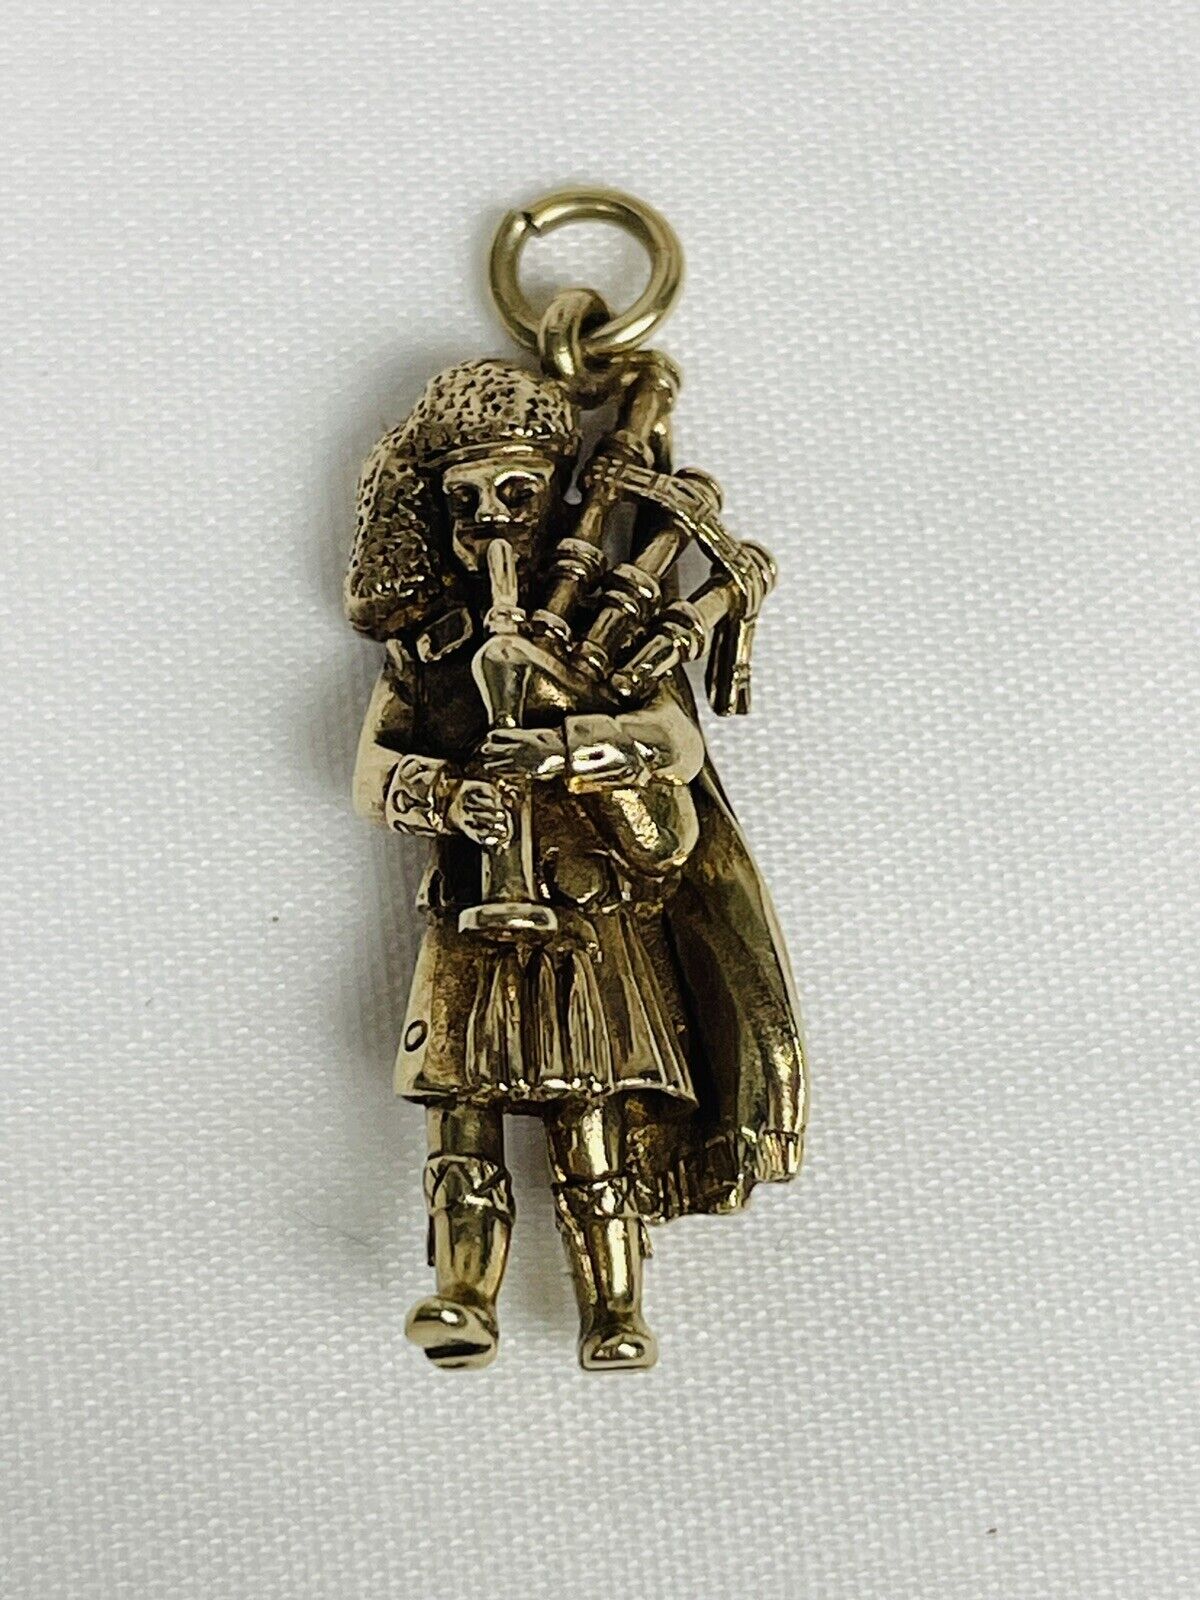 Antique Victorian 5.4g Solid 9k Yellow Gold Soldier Figurine Charm Pendant